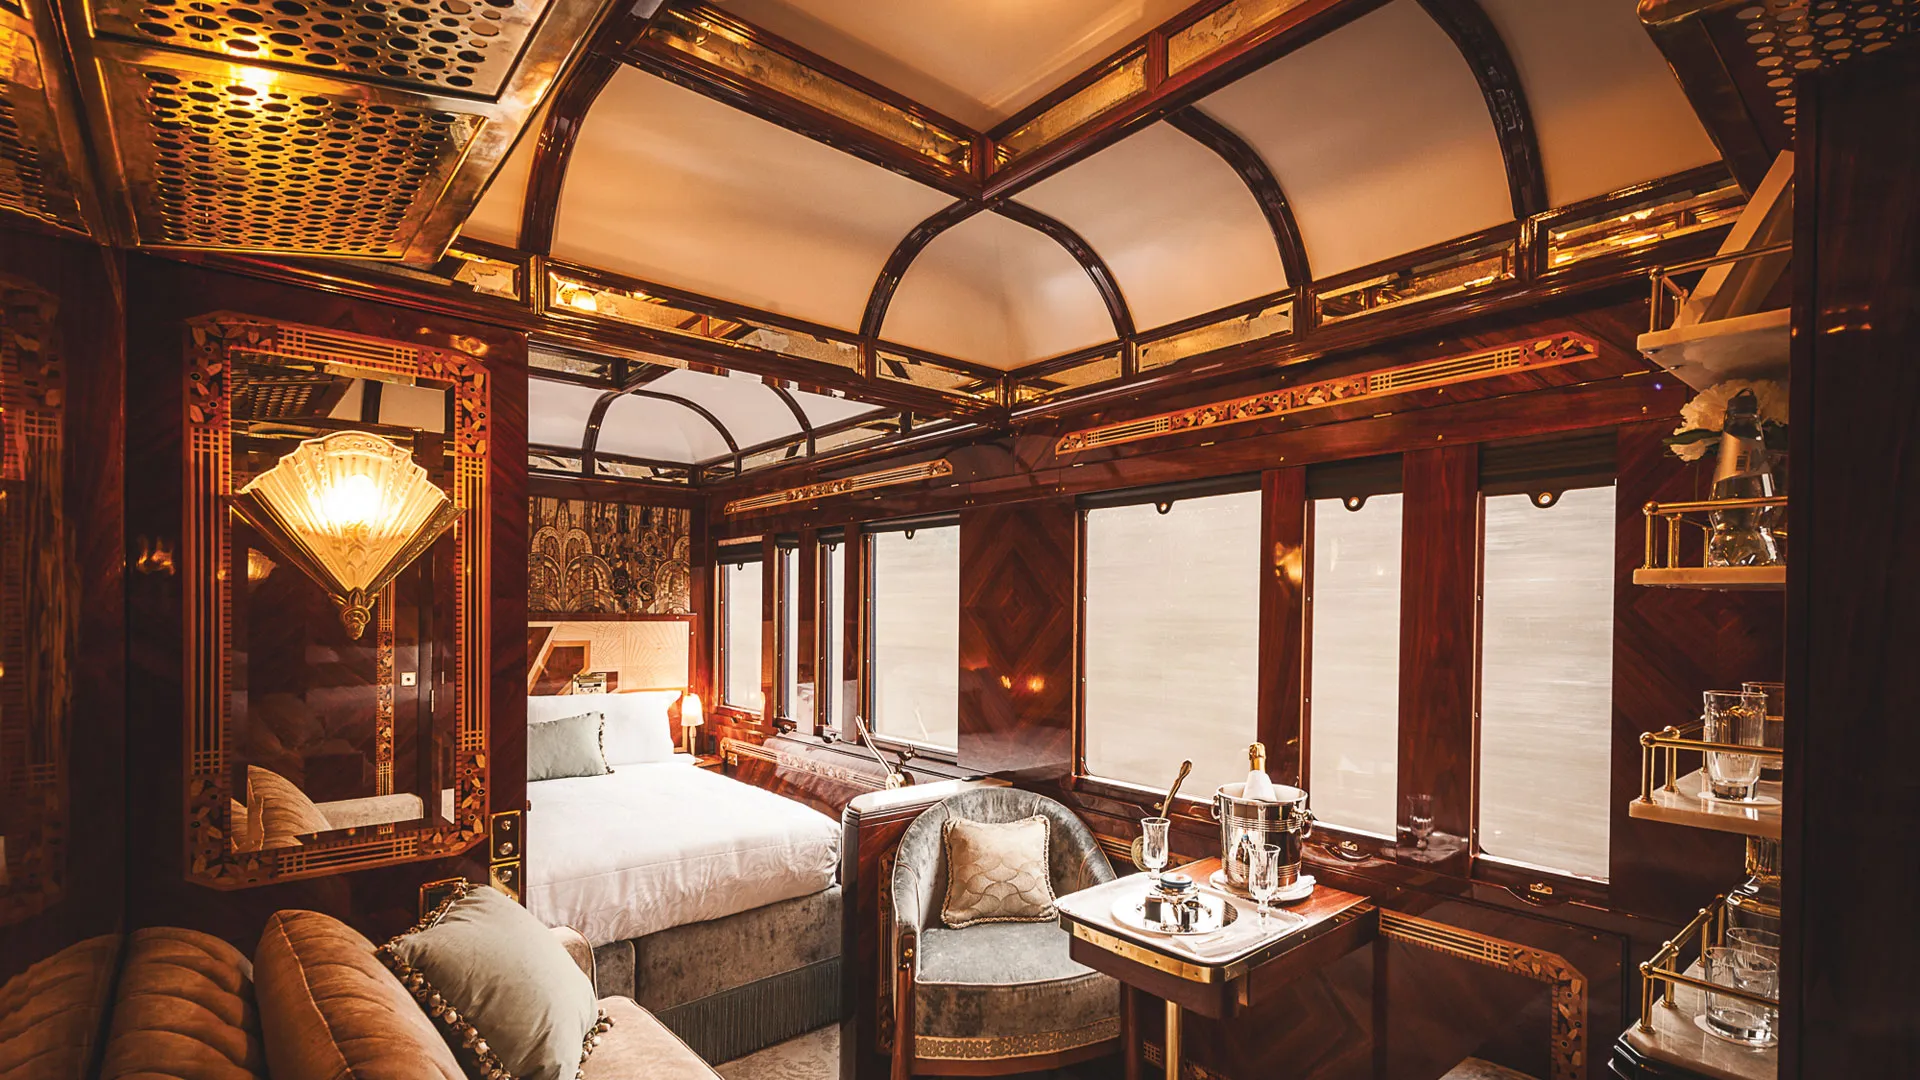 After A 3-Year Break: The “Orient Express” Visited Bulgaria